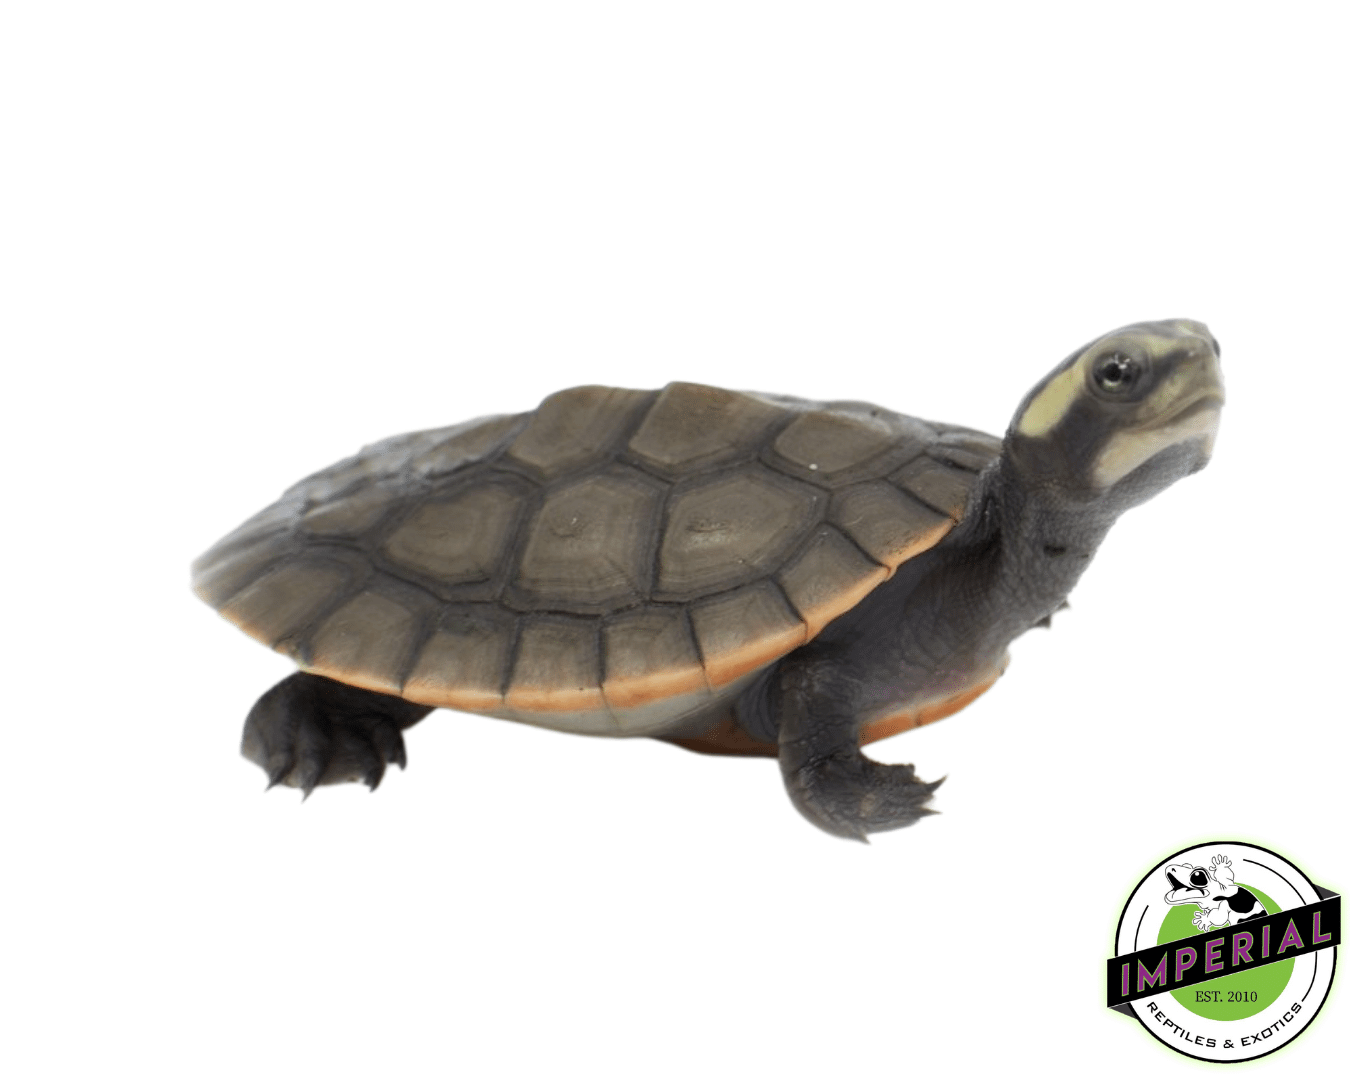 pinkbelly sideneck turtle for sale, buy reptiles online